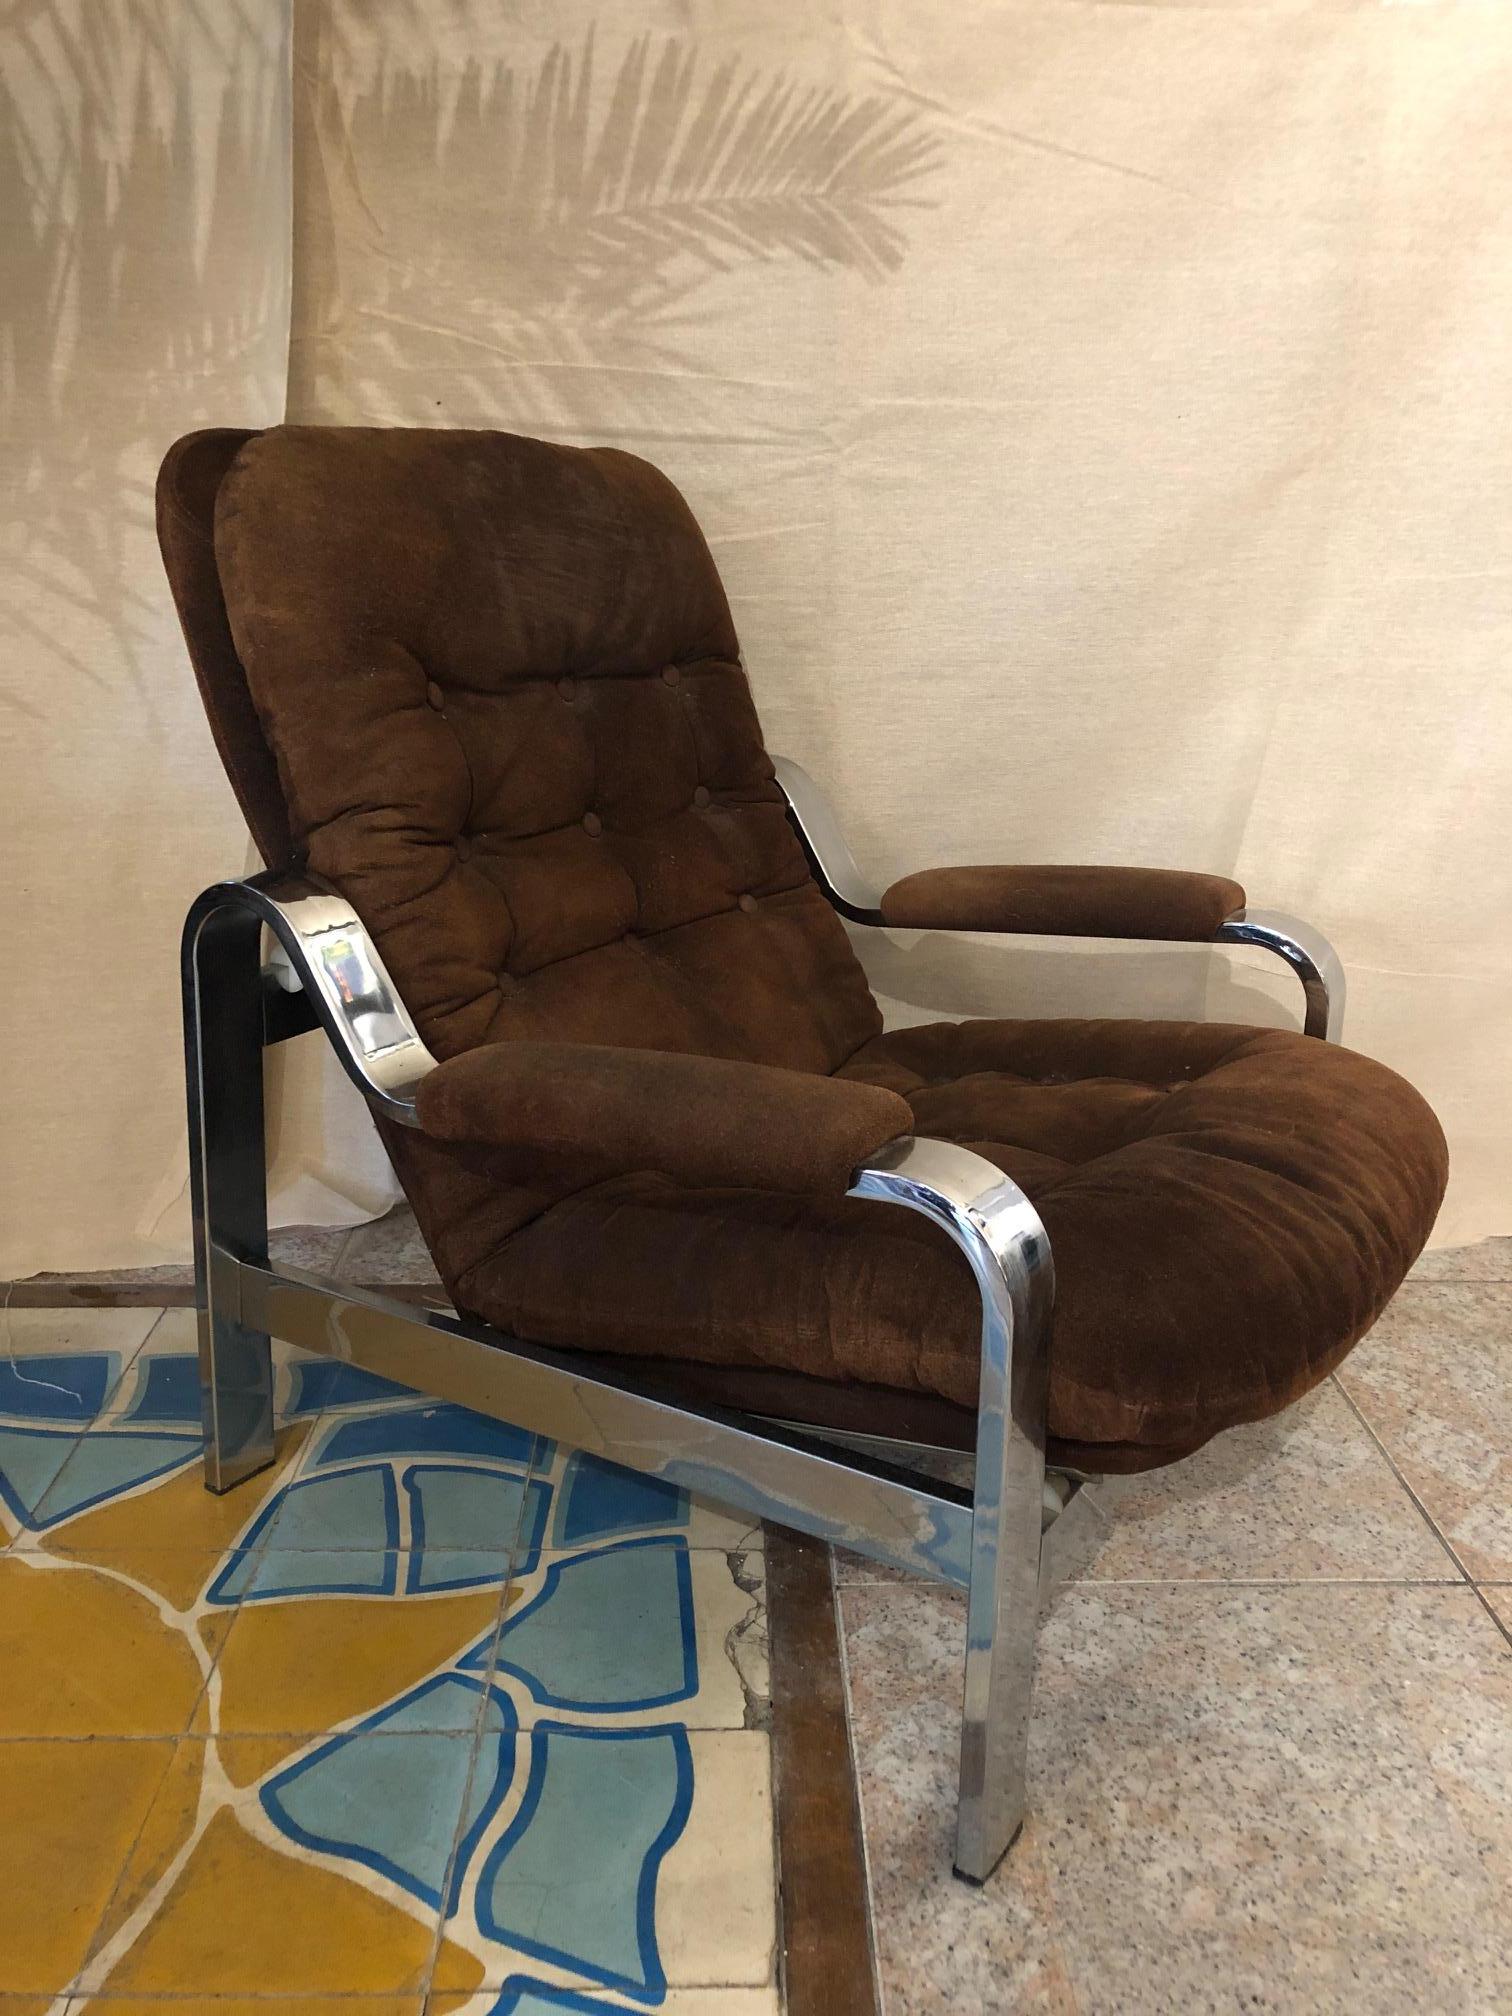 Comfortable armchair with chrome structure and suede upholstery from the 1970s
matching ottoman.